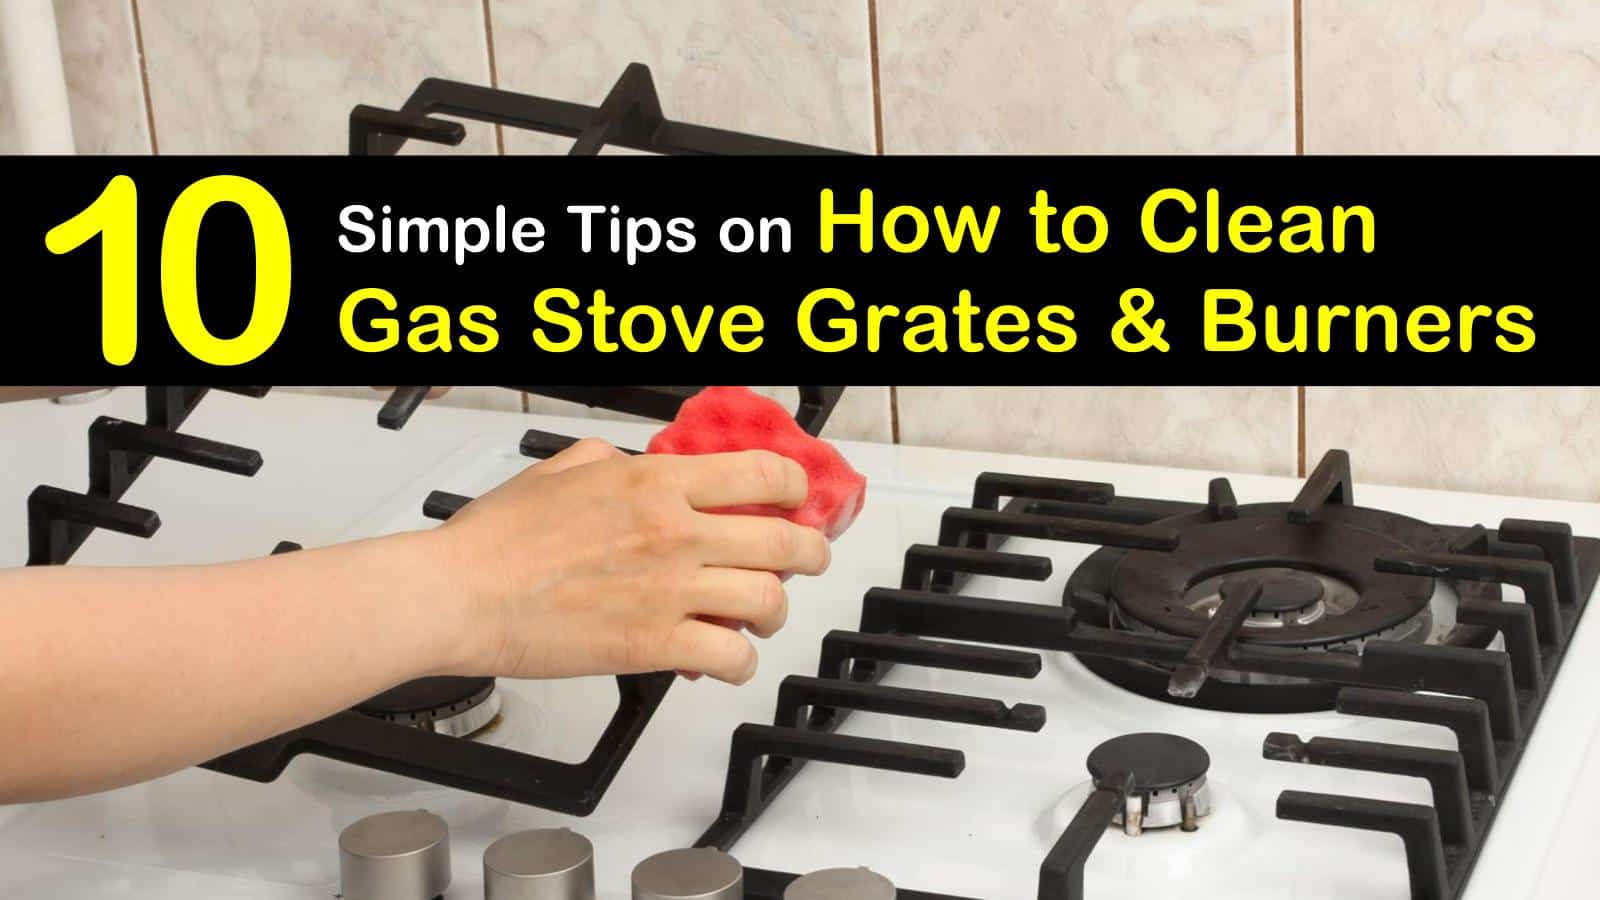 8 Simple Ways to Clean Gas Stove Grates